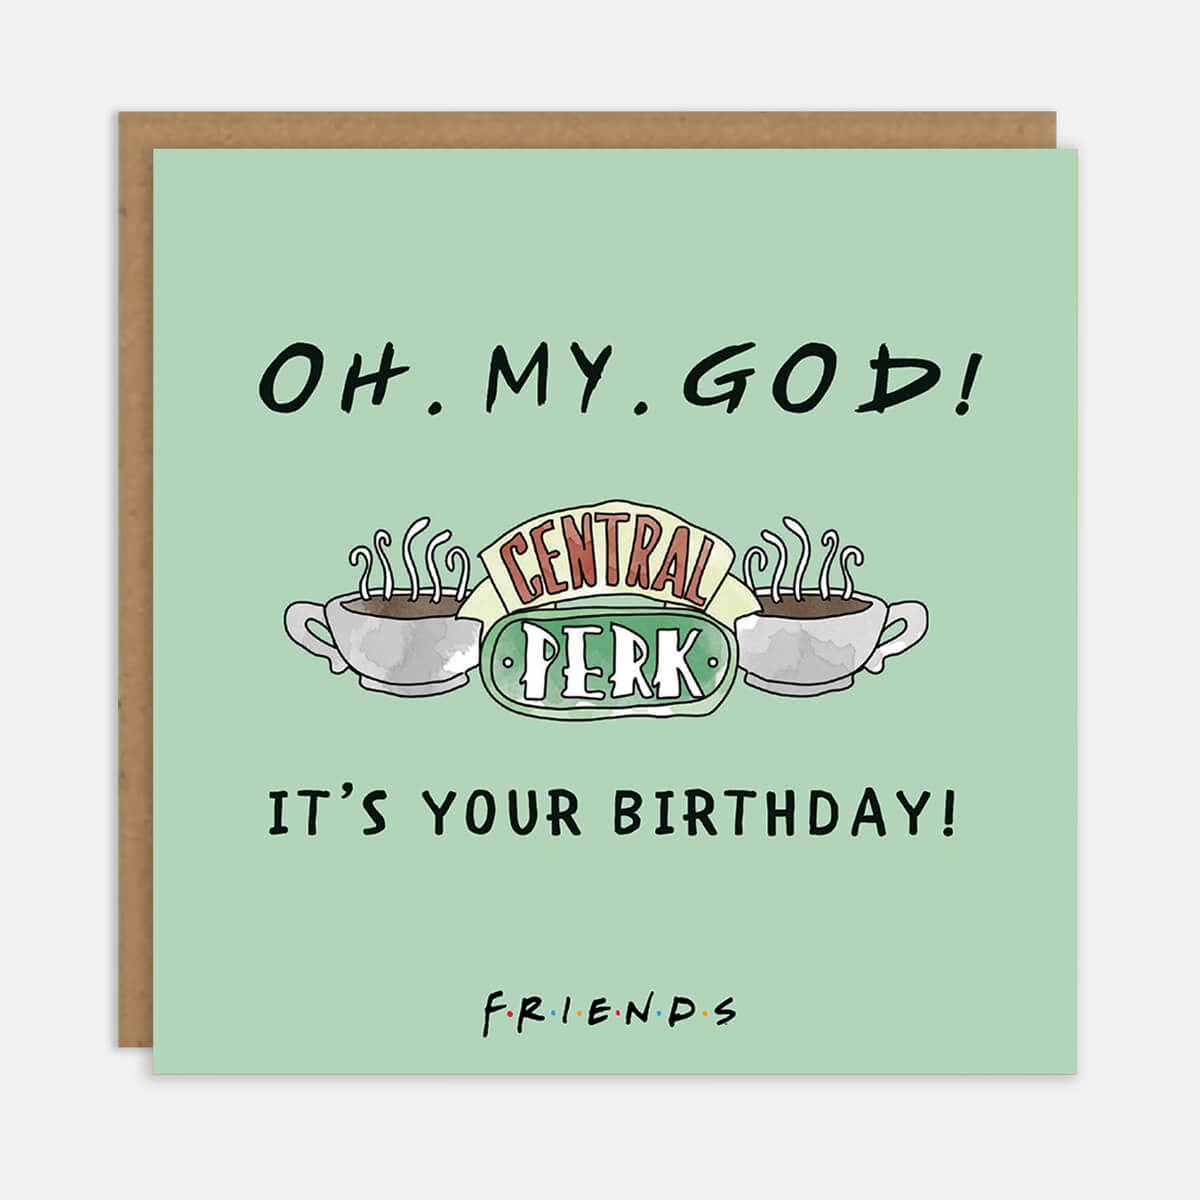 Friends TV Show Birthday Card - Janice - Card reads "Oh My God - It's Your Birthday" - Pastel green with black foiled and embossed text